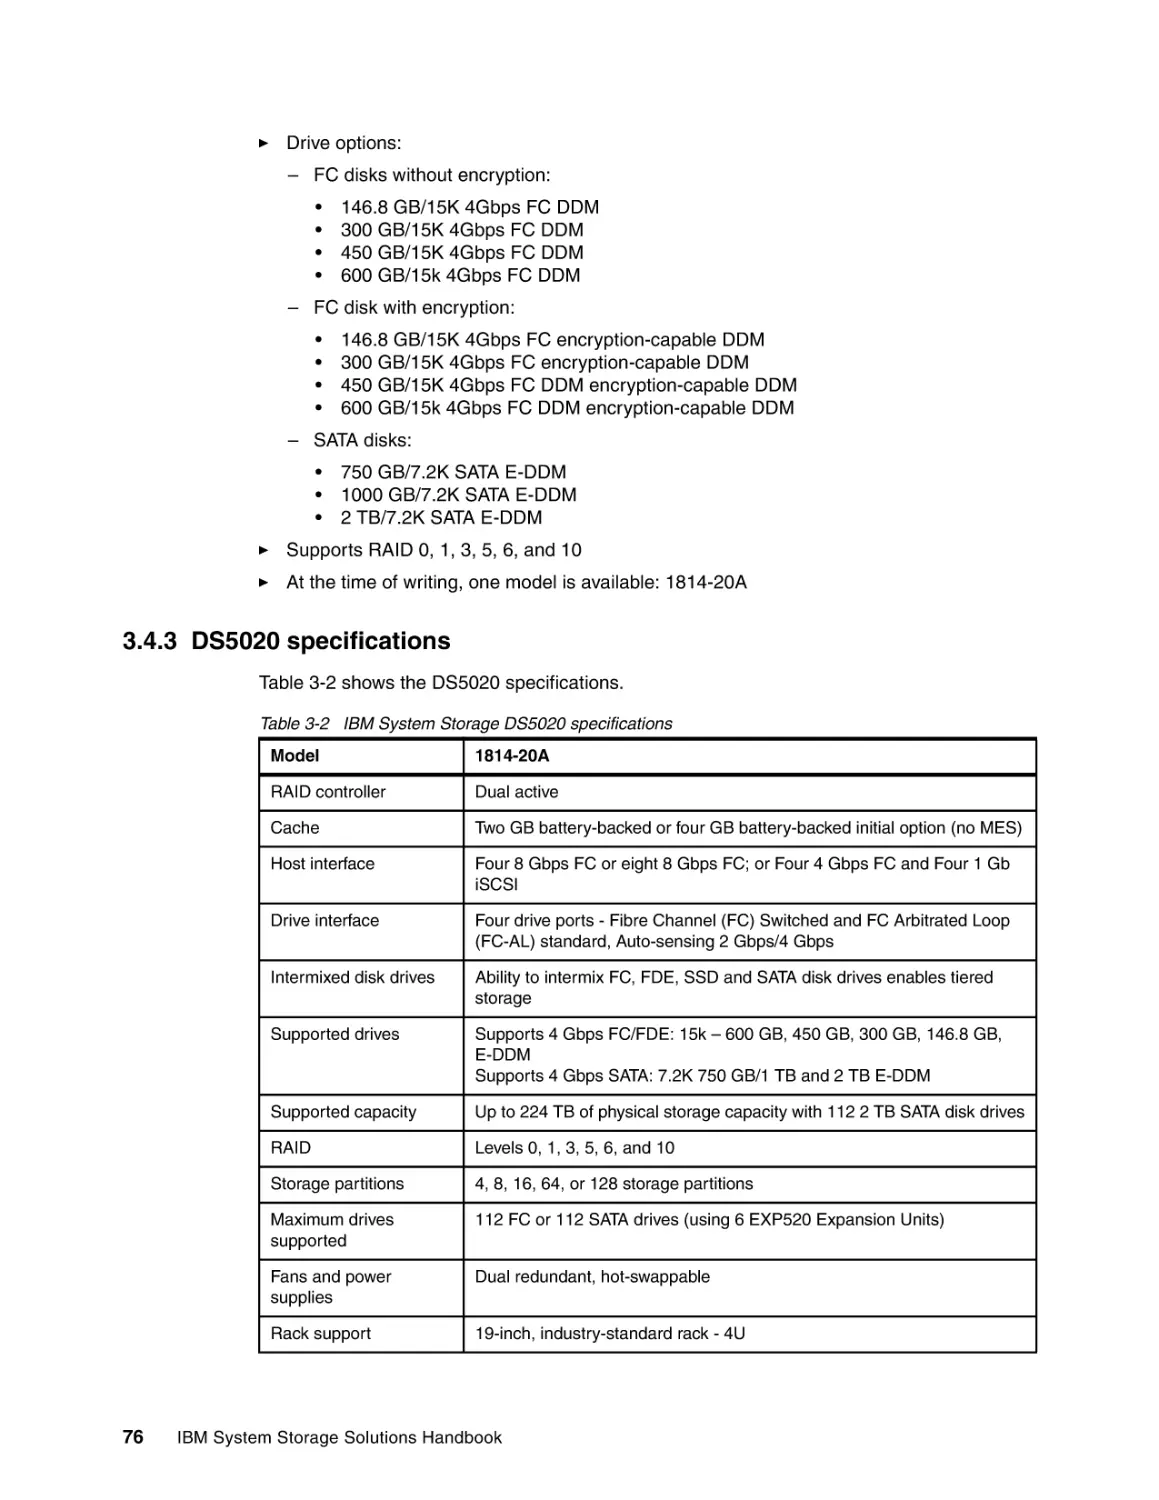 3.4.3 DS5020 specifications